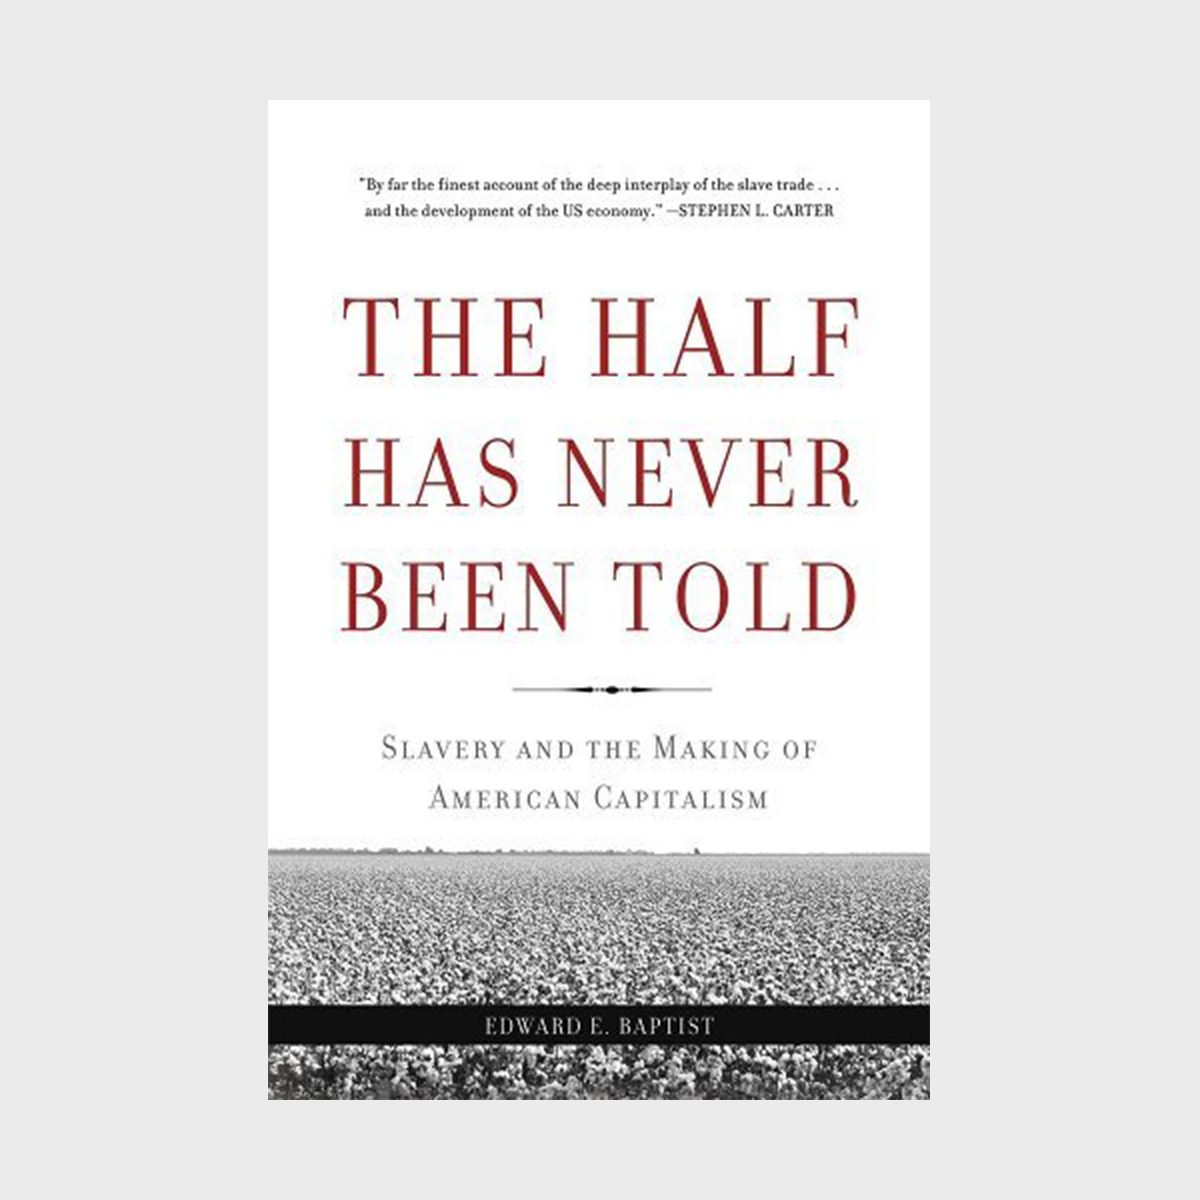 The Half Has Never Been Told Slavery And The Making Of American Capitalism By Edward E. Baptist